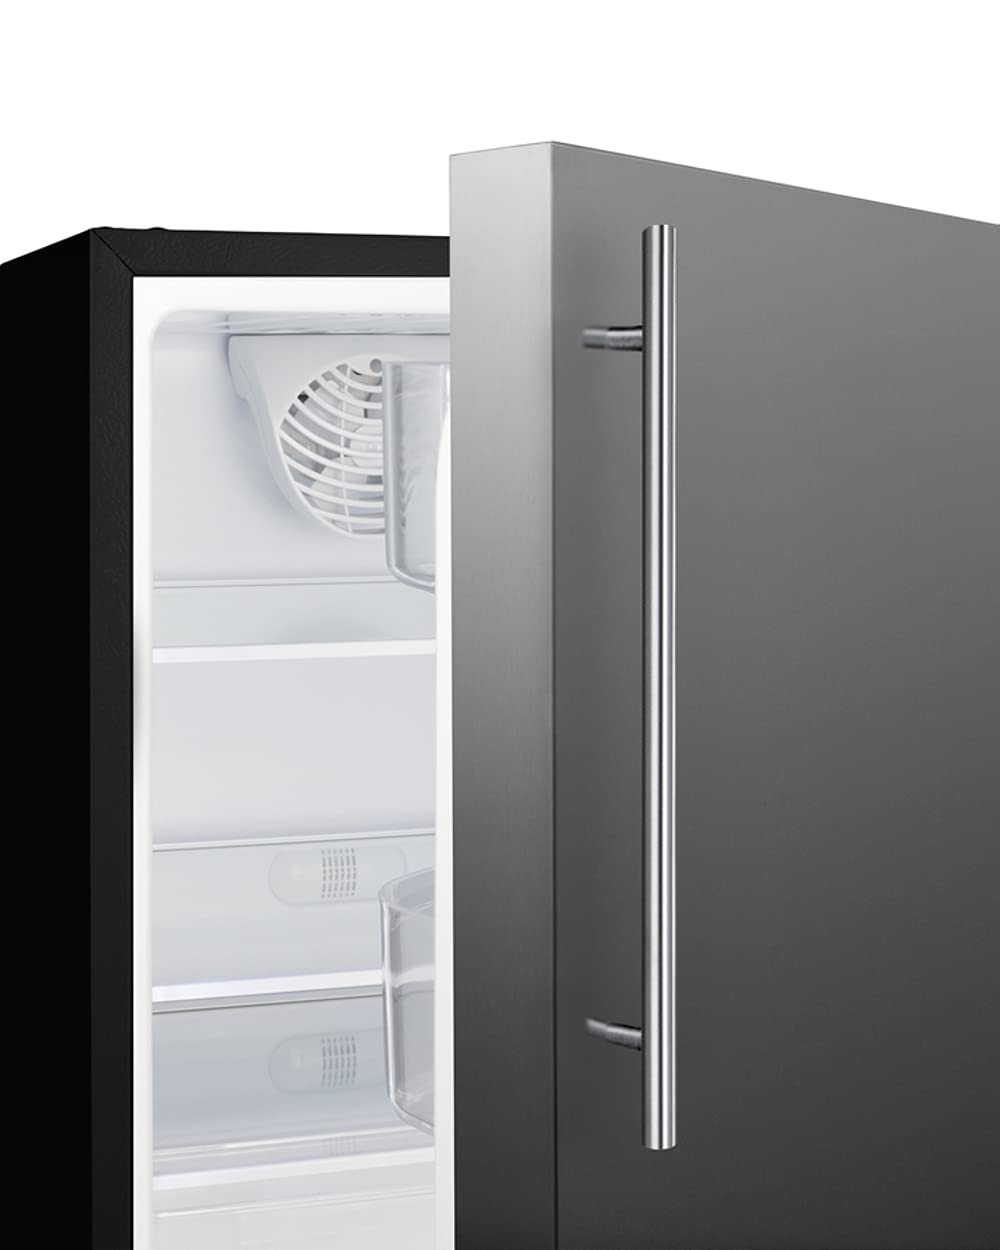 Summit Appliance ALR47BSSHV 20" Wide Built-In All-Refrigerator, ADA Compliant, Adjustable Thermostat, 3.53 cu.ft Capacity, Removable Door Racks, Temperature Alarms, Automatic Defrost